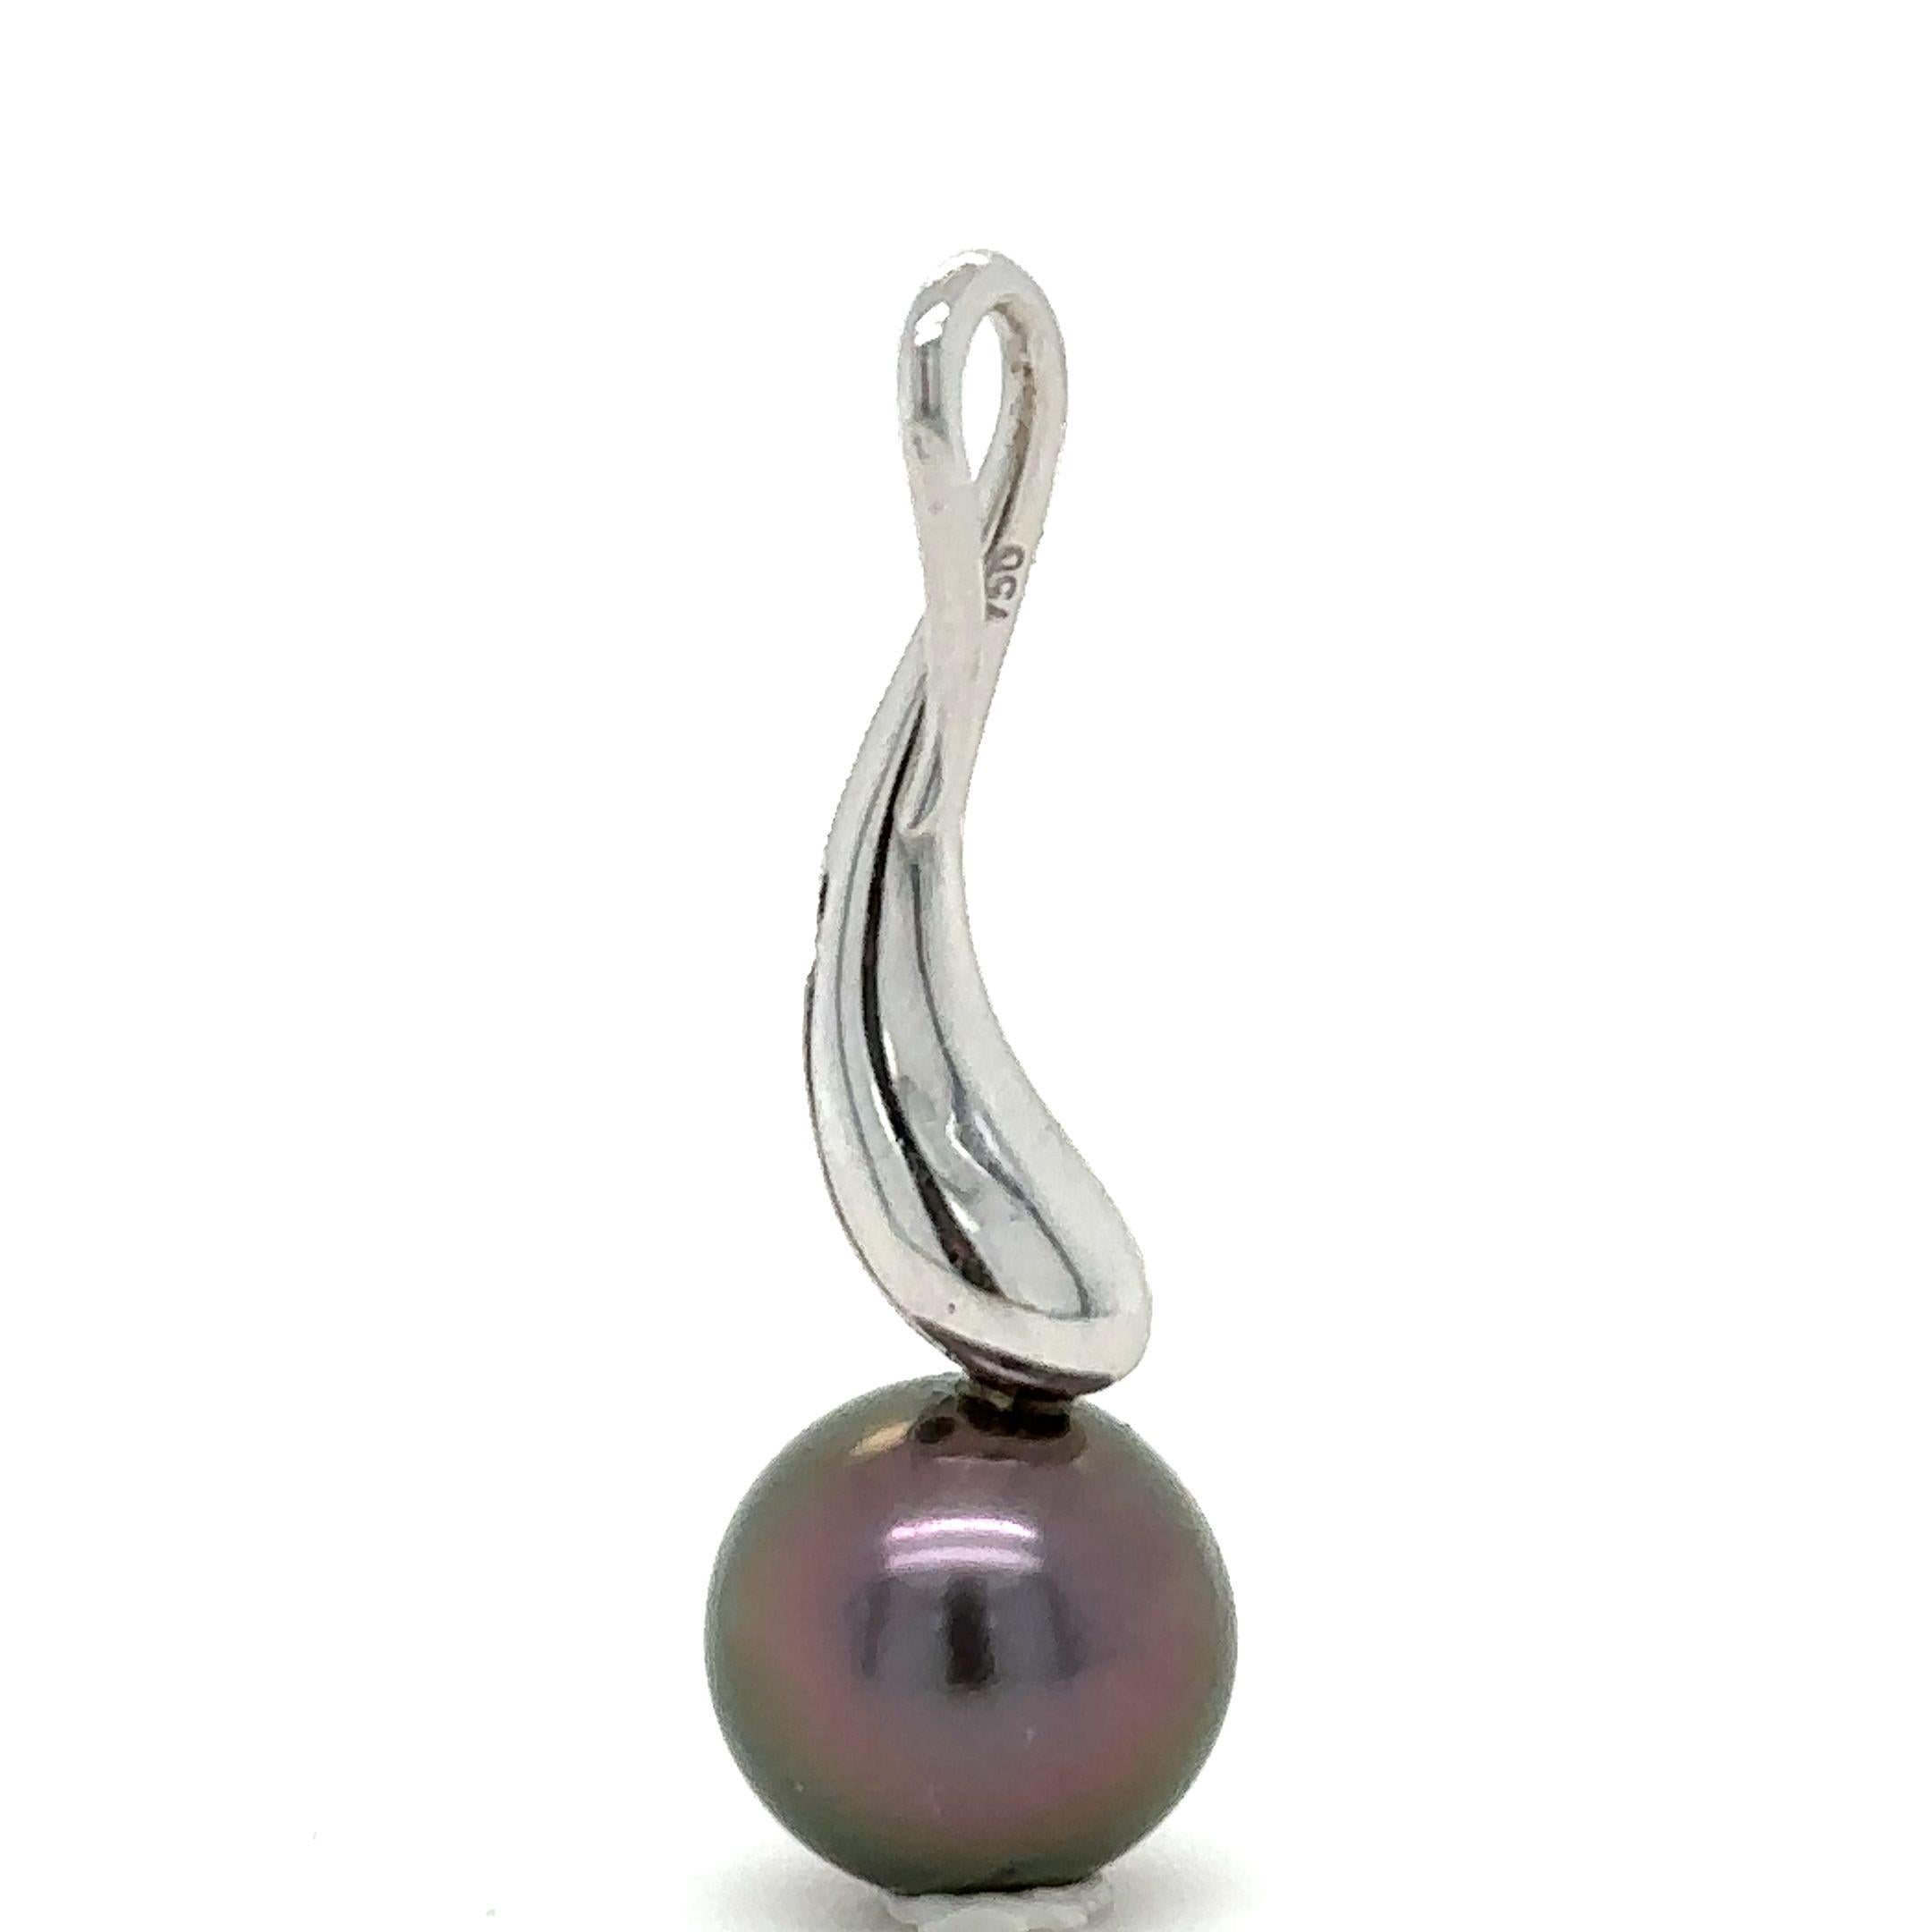 A Willie Creek, Tahitian Pearl and Diamond pendant, made of 18ct White Gold, and weighing 2.87 gm. Stamped: 750. Set with a single round Tahitian pearl.

The setting is pave set with round, brilliant cut Diamonds.

Metal: 18ct White Gold
Carat: